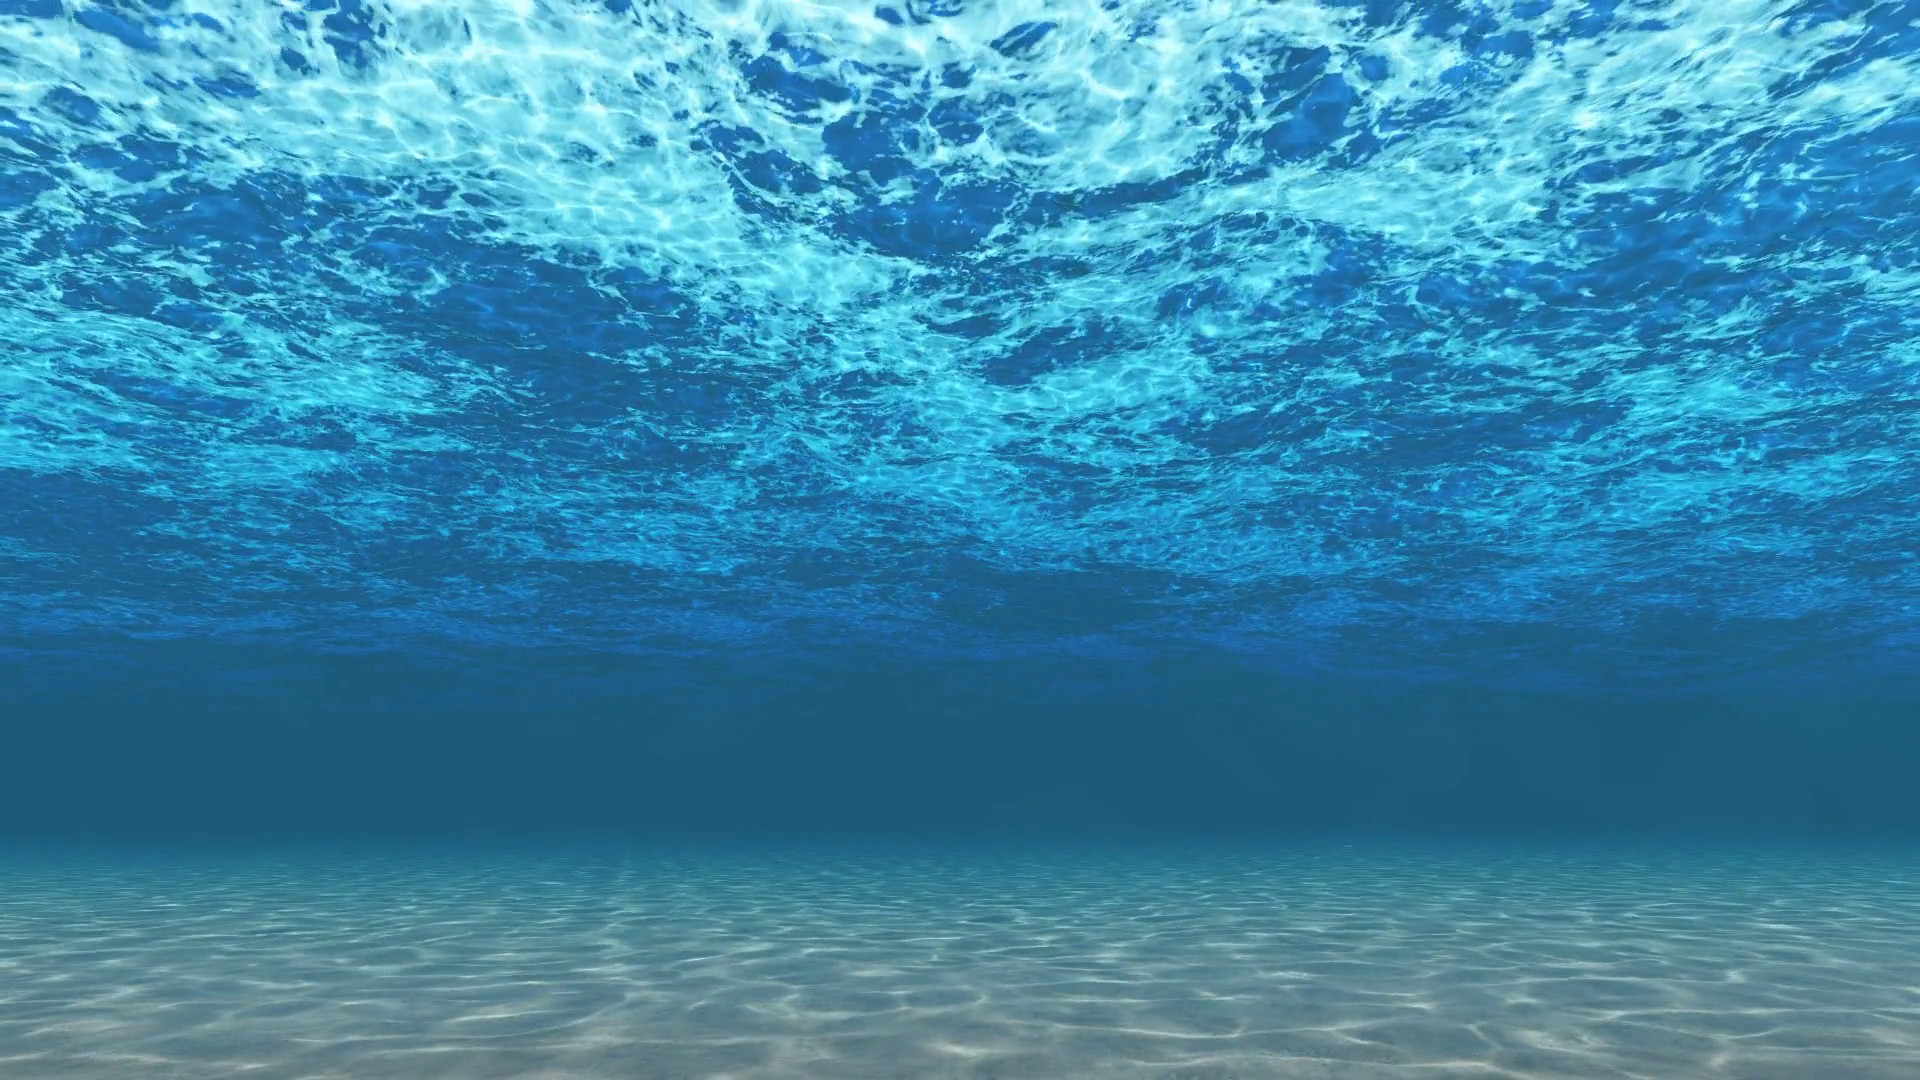 Underwater Backgrounds (66+ images)